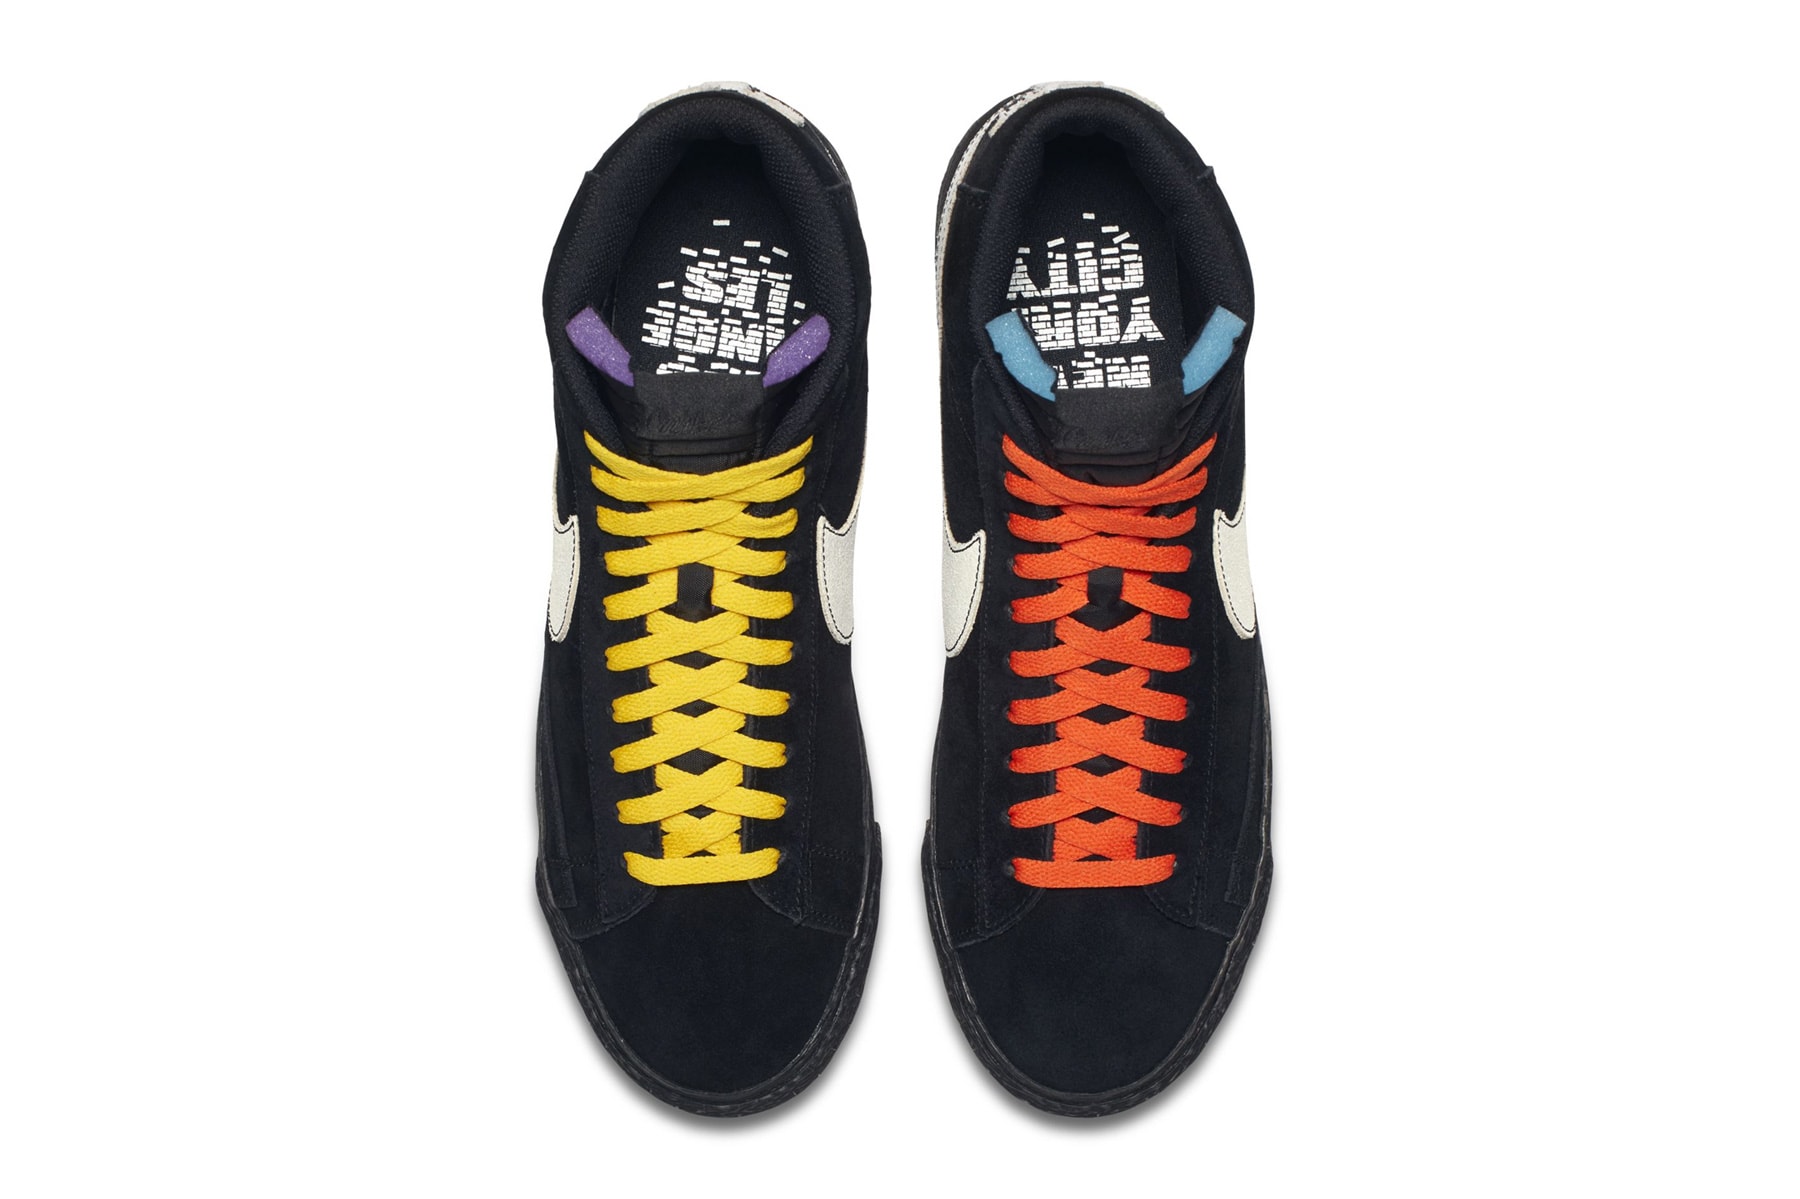 Nike Blazer Mid LA Lakers vs. NY Knicks los angeles new york nba colorway mismatched sneaker release date info price purchase